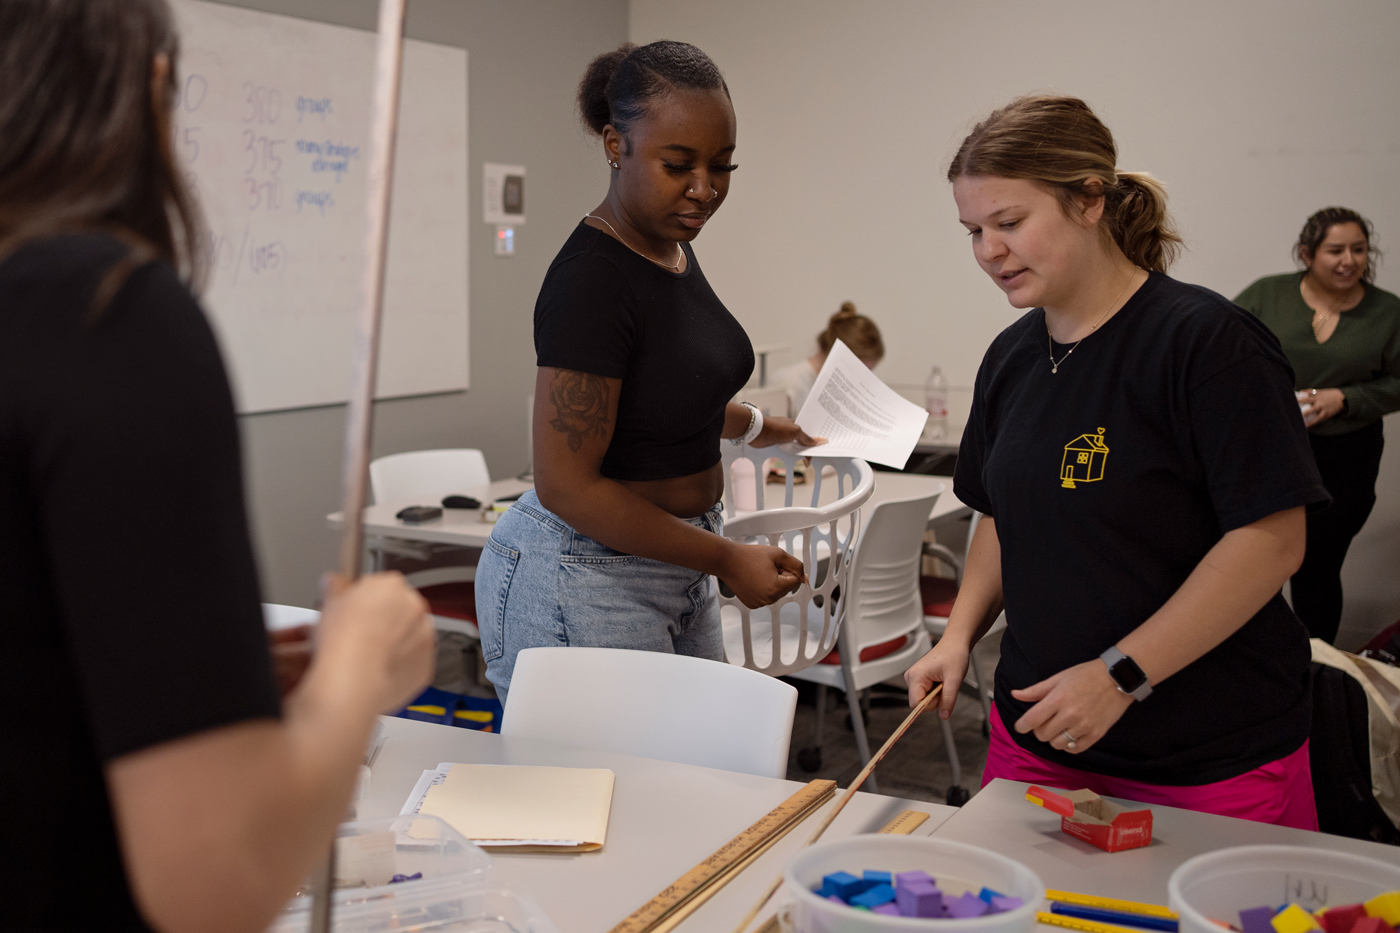 Kenetria Deckard, left, and Emily Lewis, right, get supplies for an exercise during a teacher-certification class with seniors at the University of Houston.